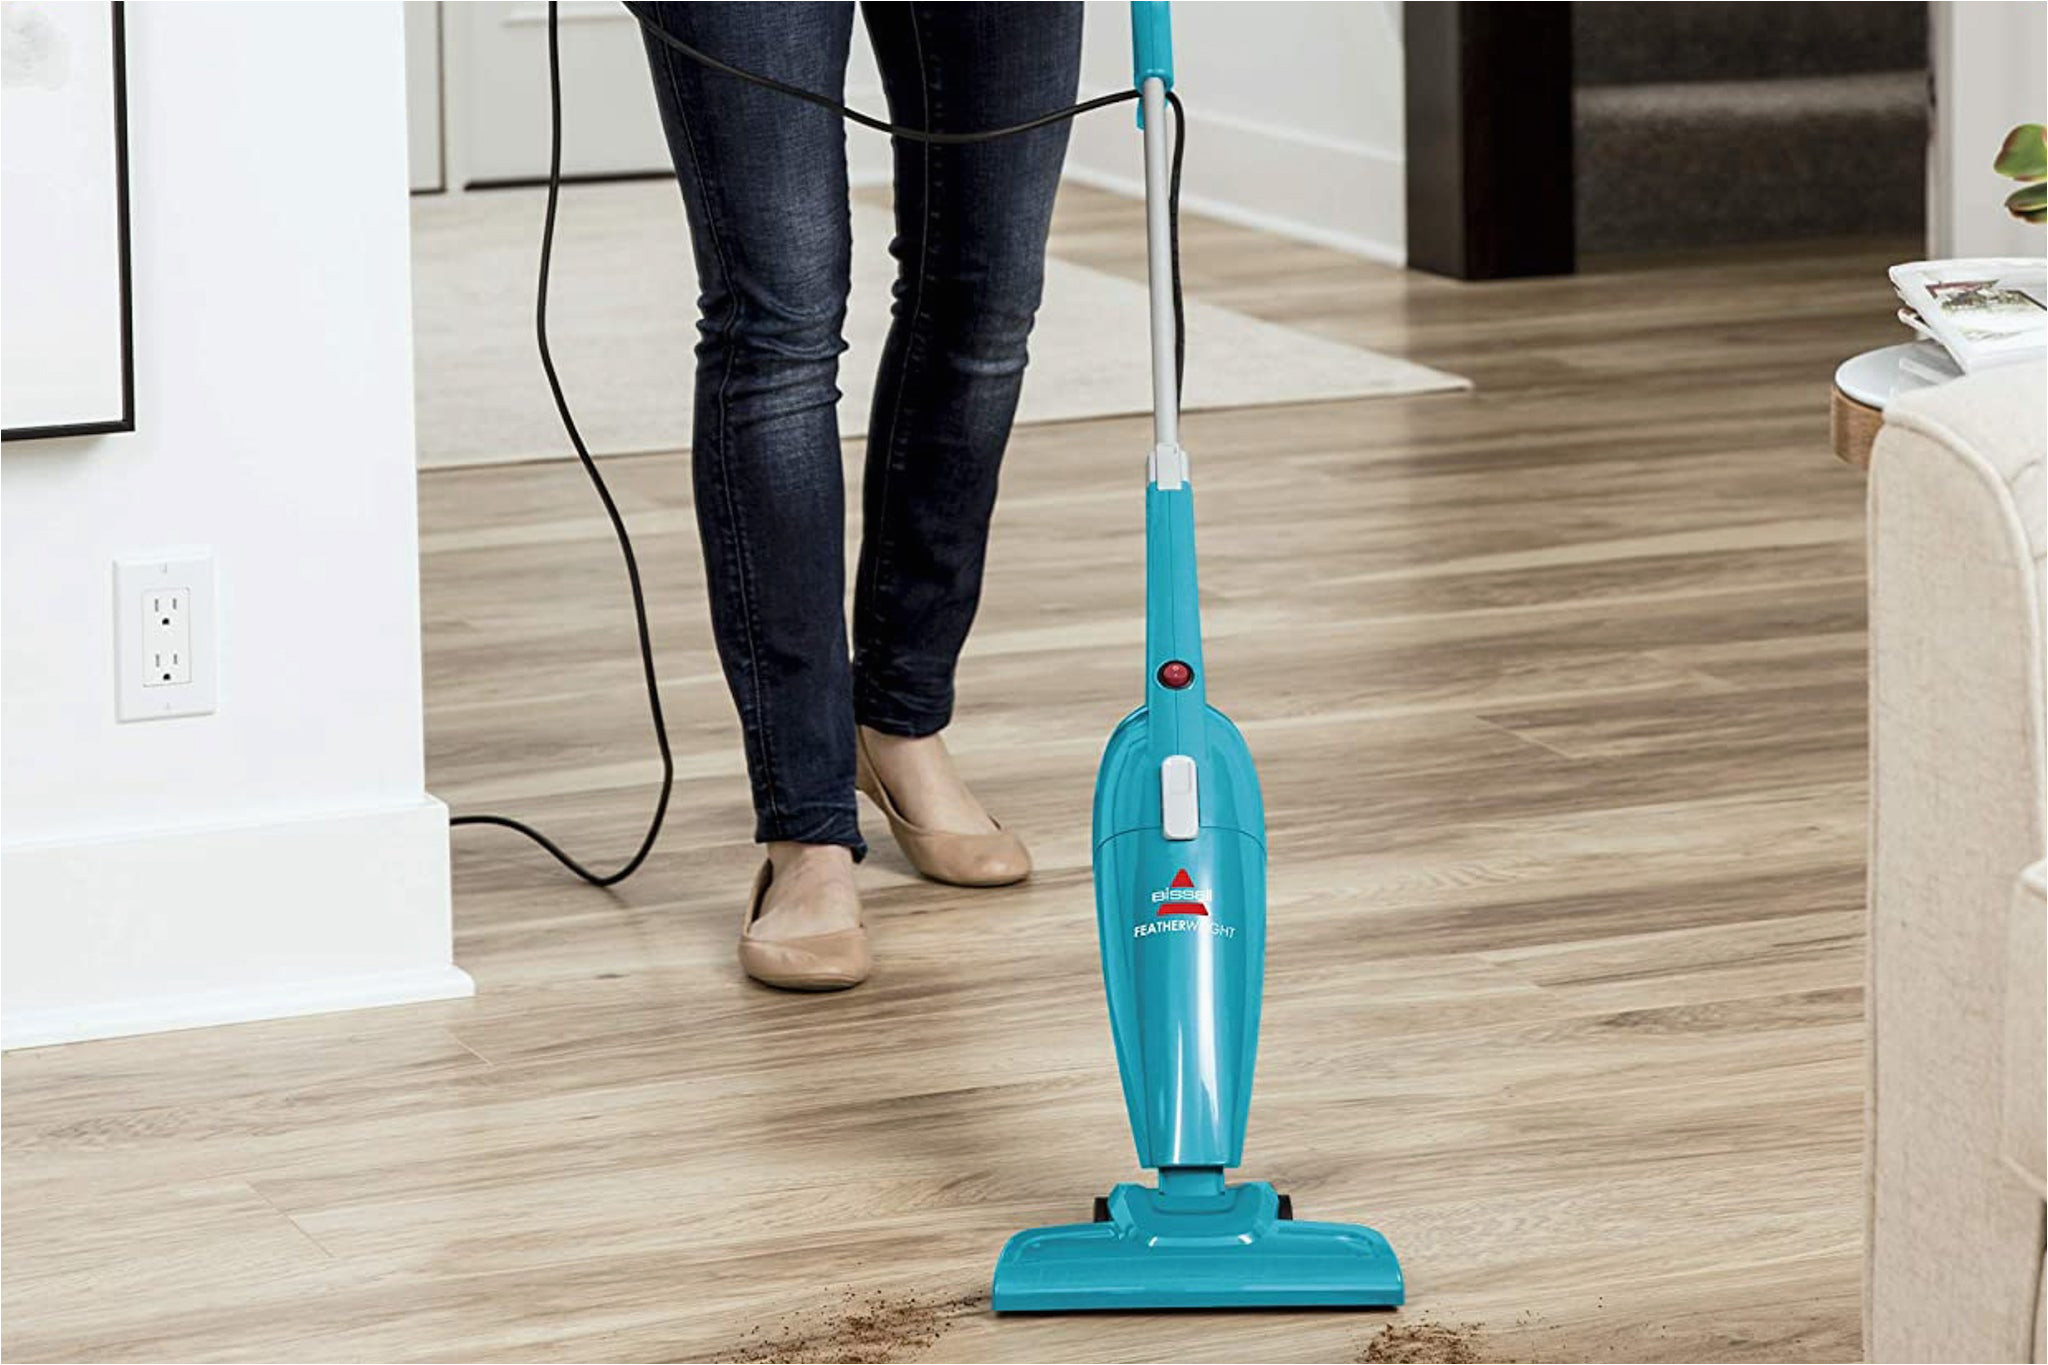 Best Vacuum Cleaner for Hardwood Floors and area Rugs the 3 Best Vacuums for Hardwood Floors Of 2022 Reviews by Wirecutter